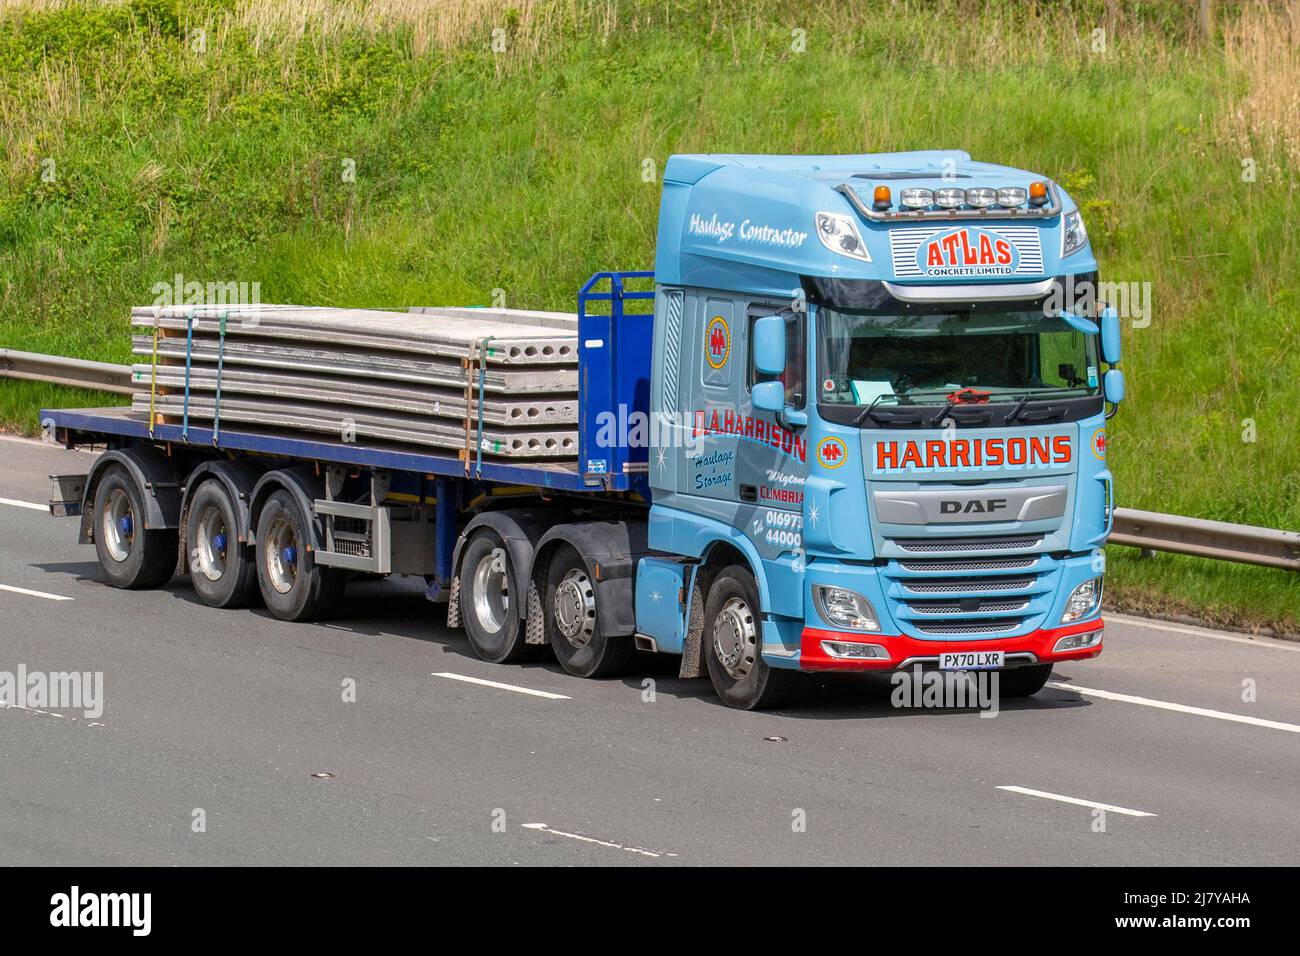 2020 Daf Trucks 530 FTR 12902cc Diesel Automatic carrying Atlas Concrete Limited products. D.A.HARRISON Haulage Contractor; driving on the M6 motorway, UK Stock Photo